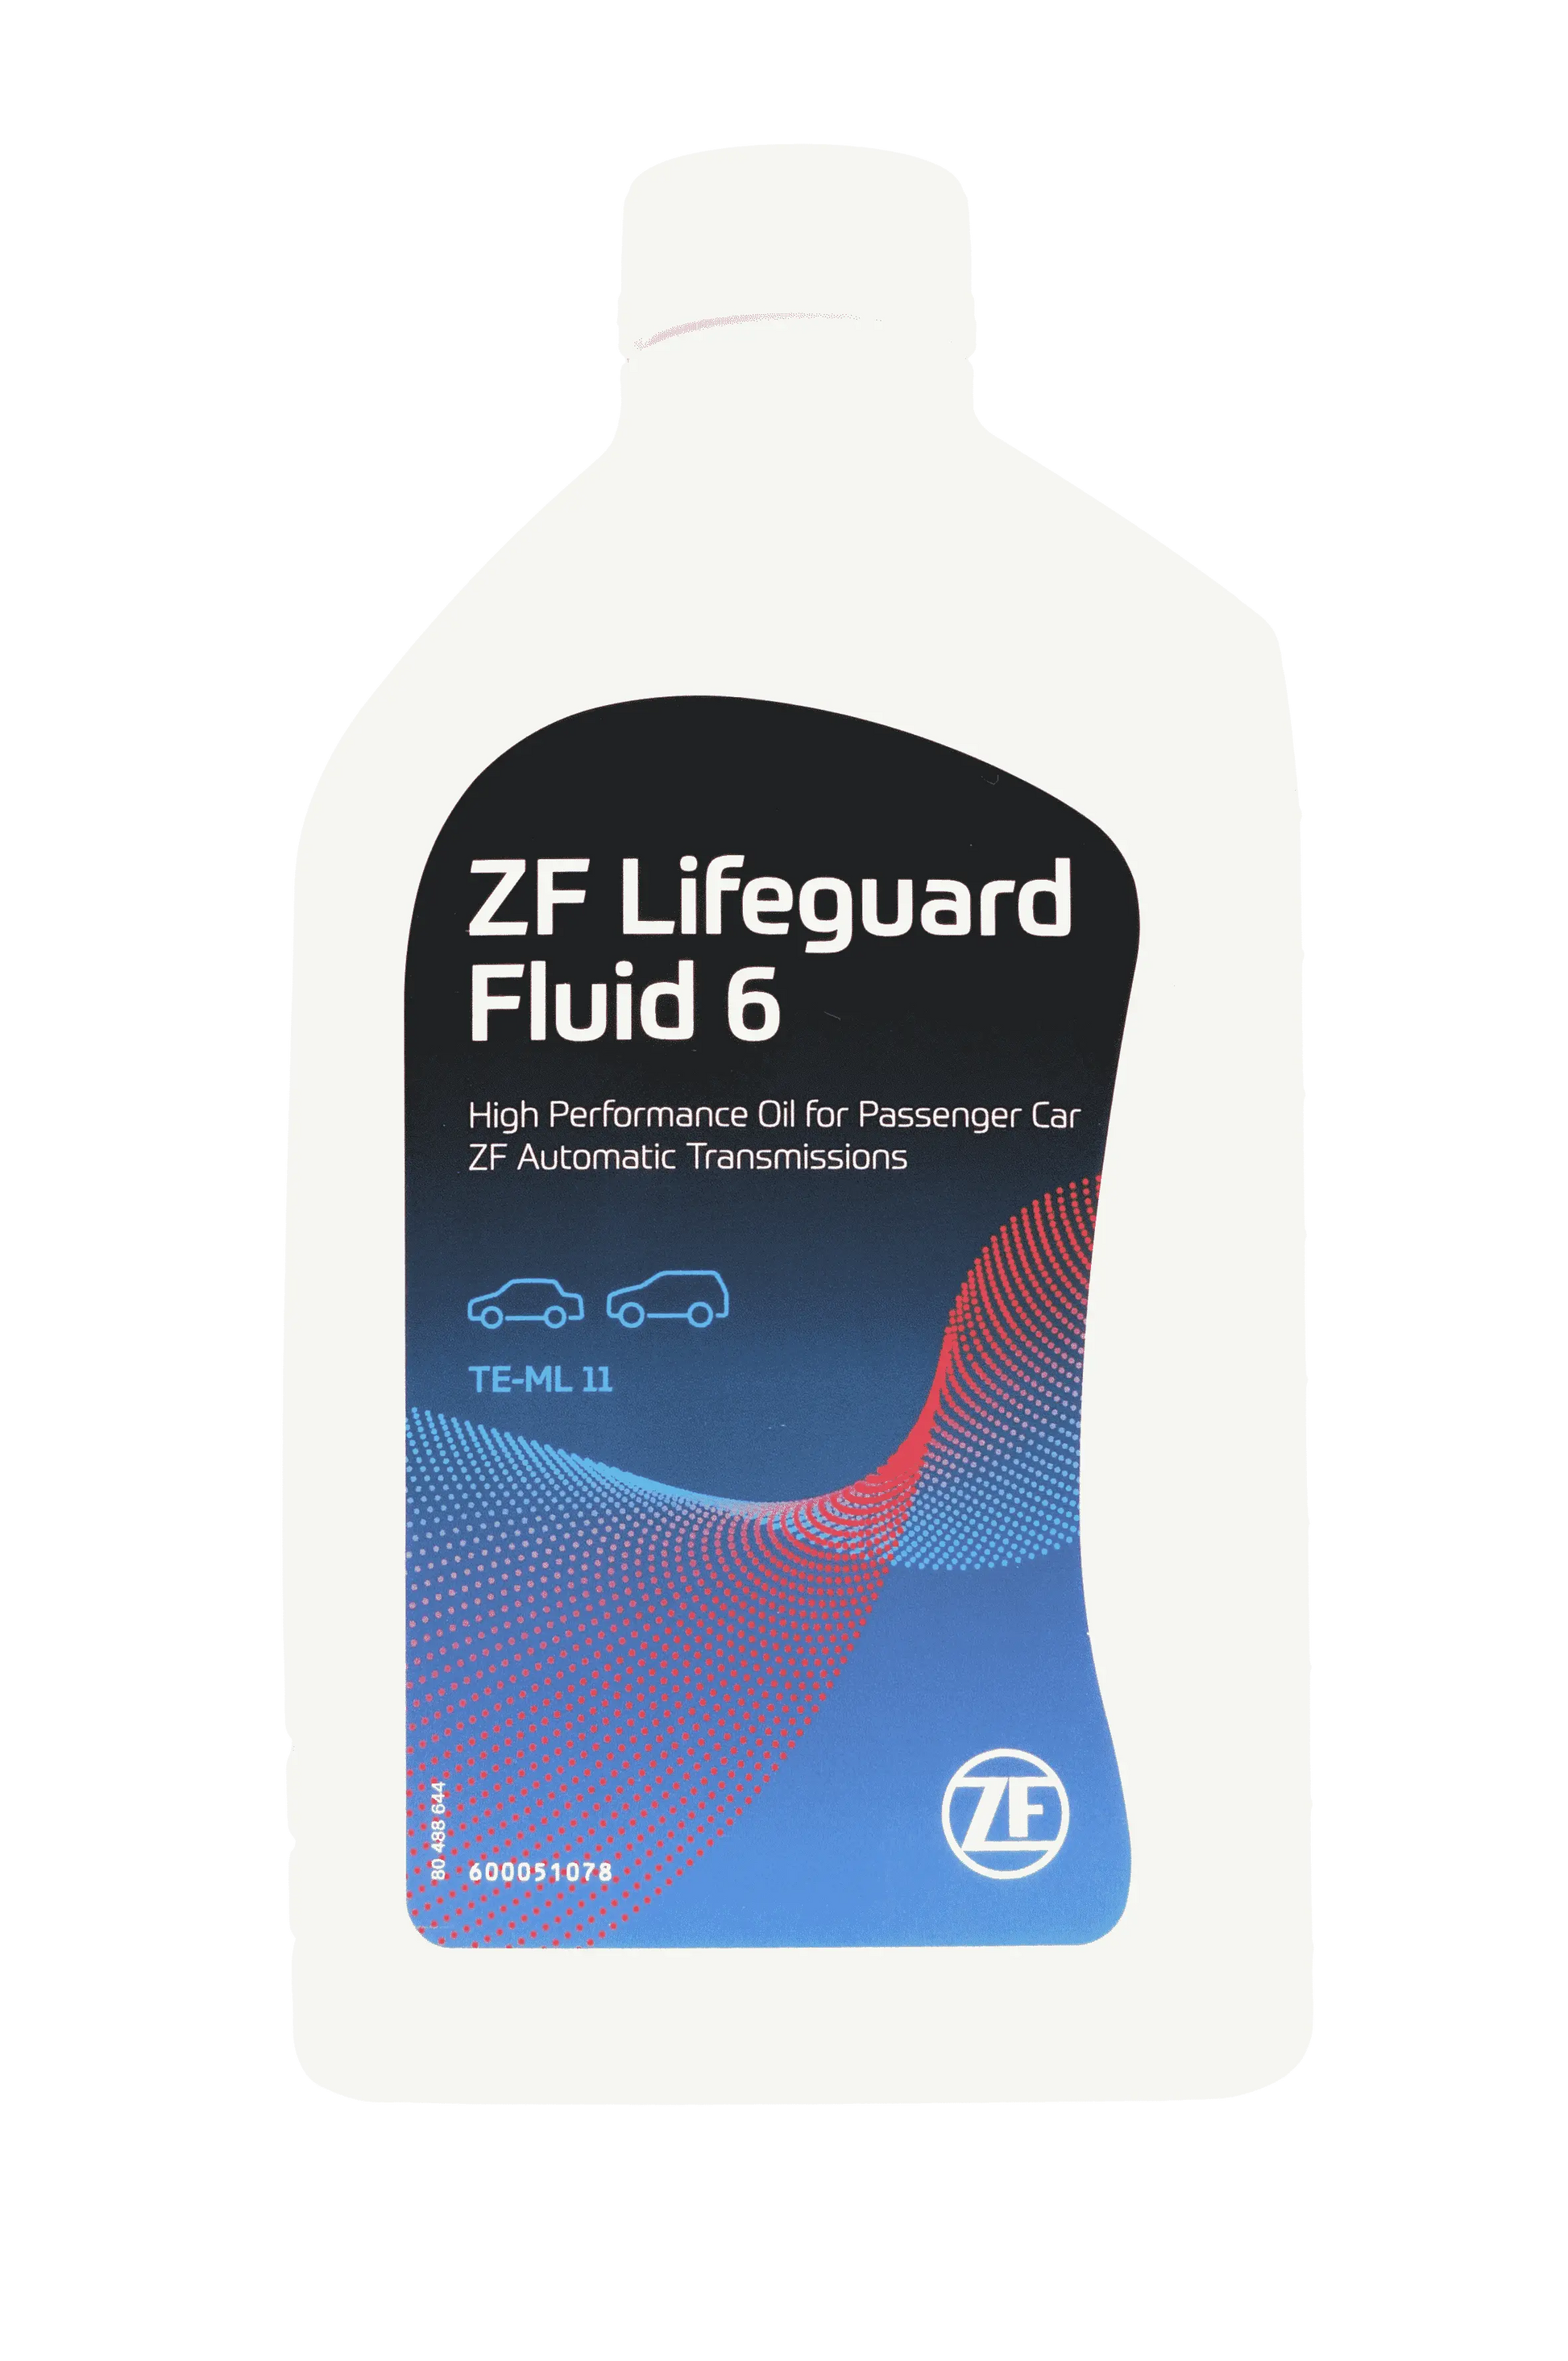 Buy now from Sussex Autos ZF Lifeguard Fluid 6 (1 L)